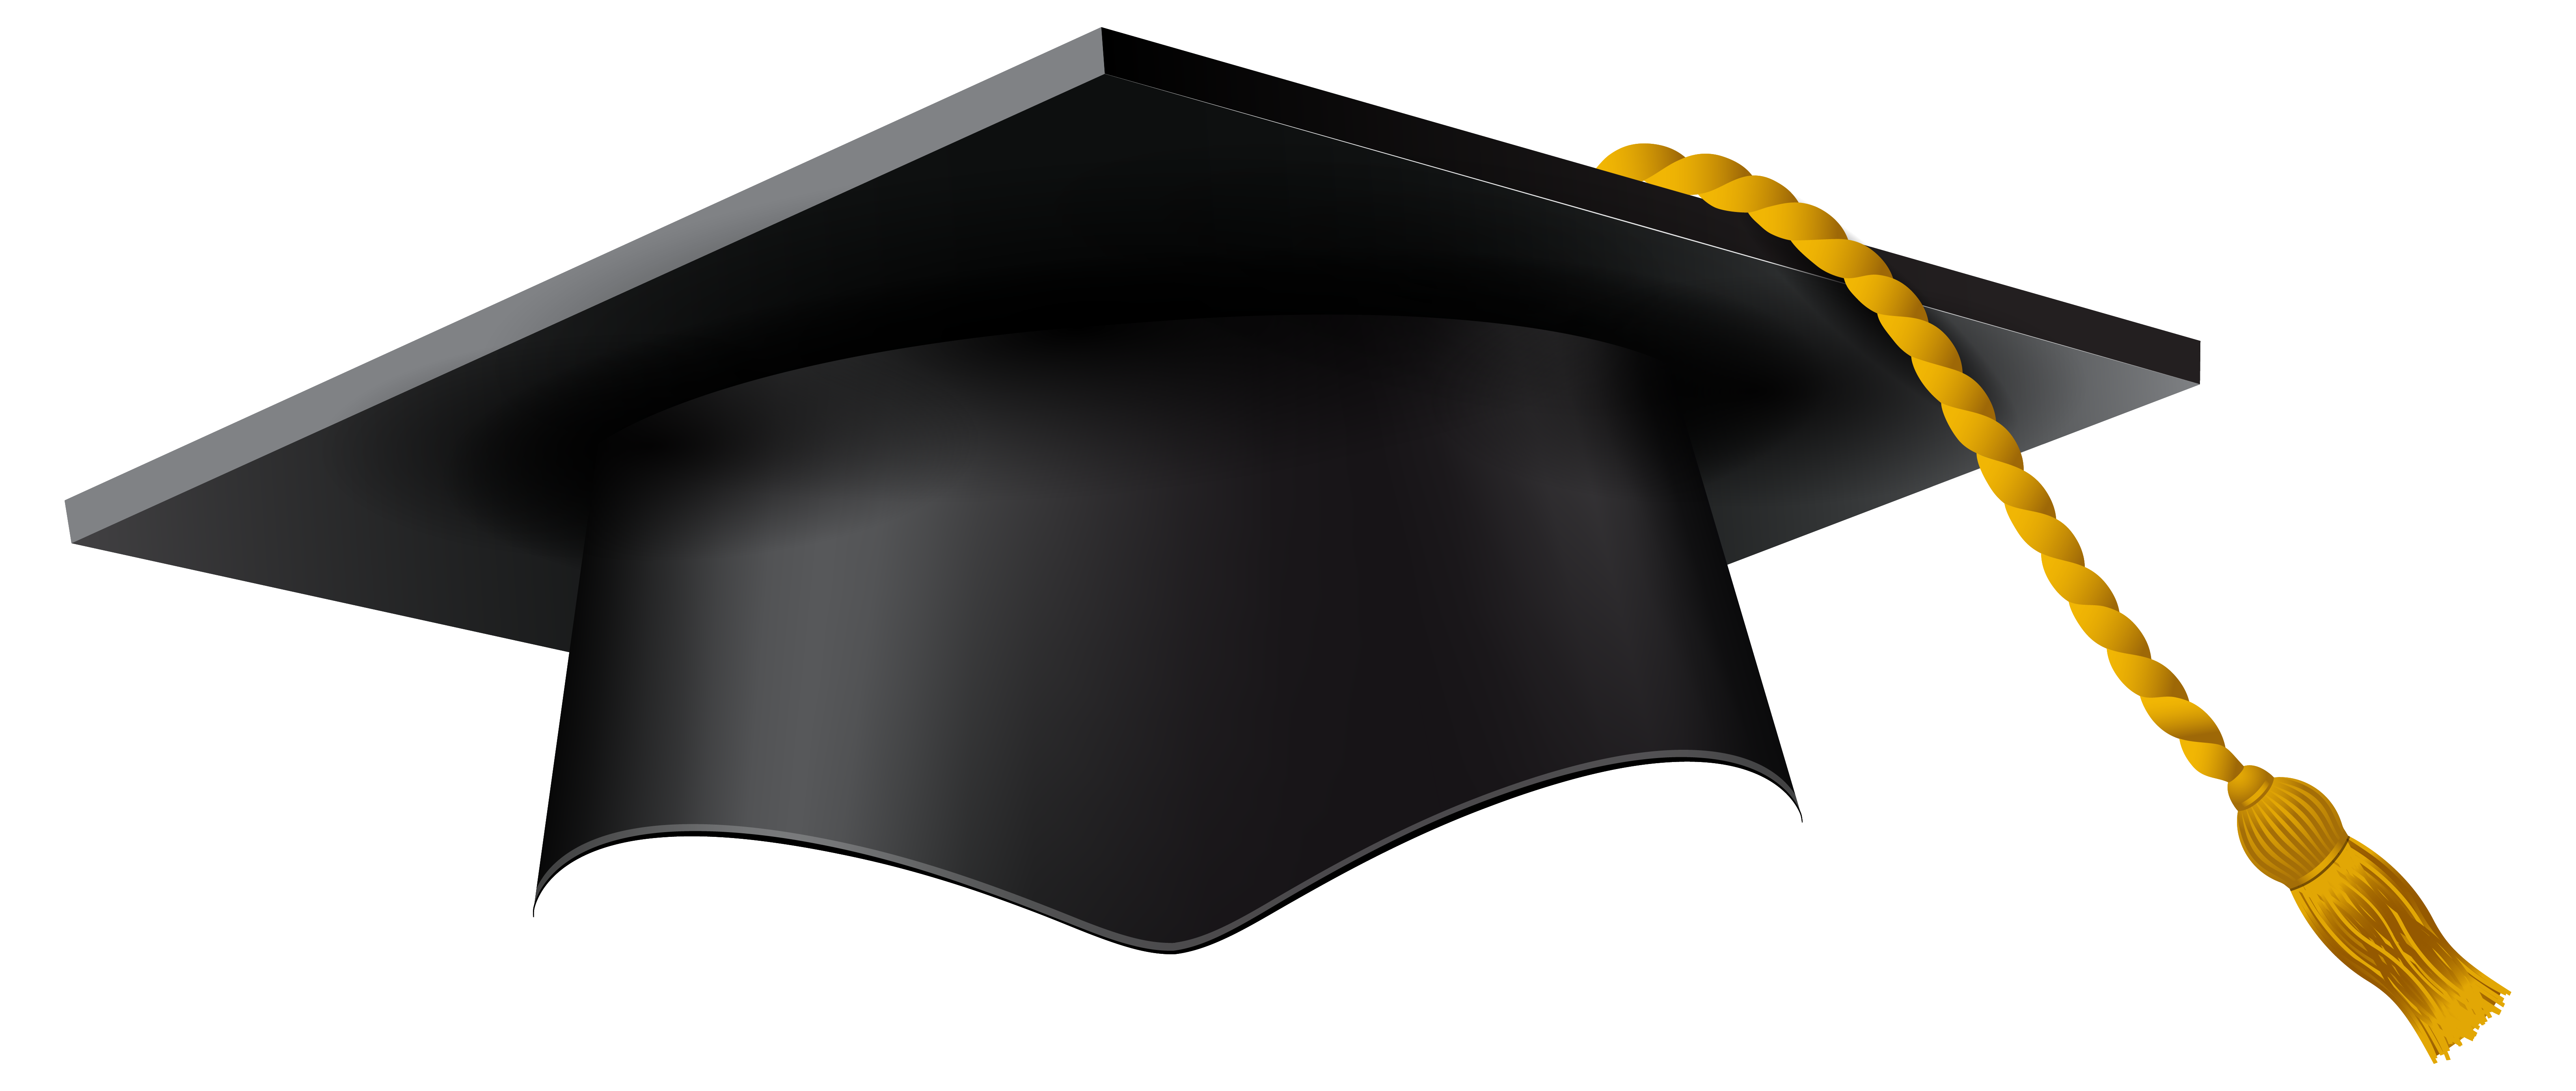 Graduation Cap PNG Image​-Quality Free Image and Transparent PNG Clipart